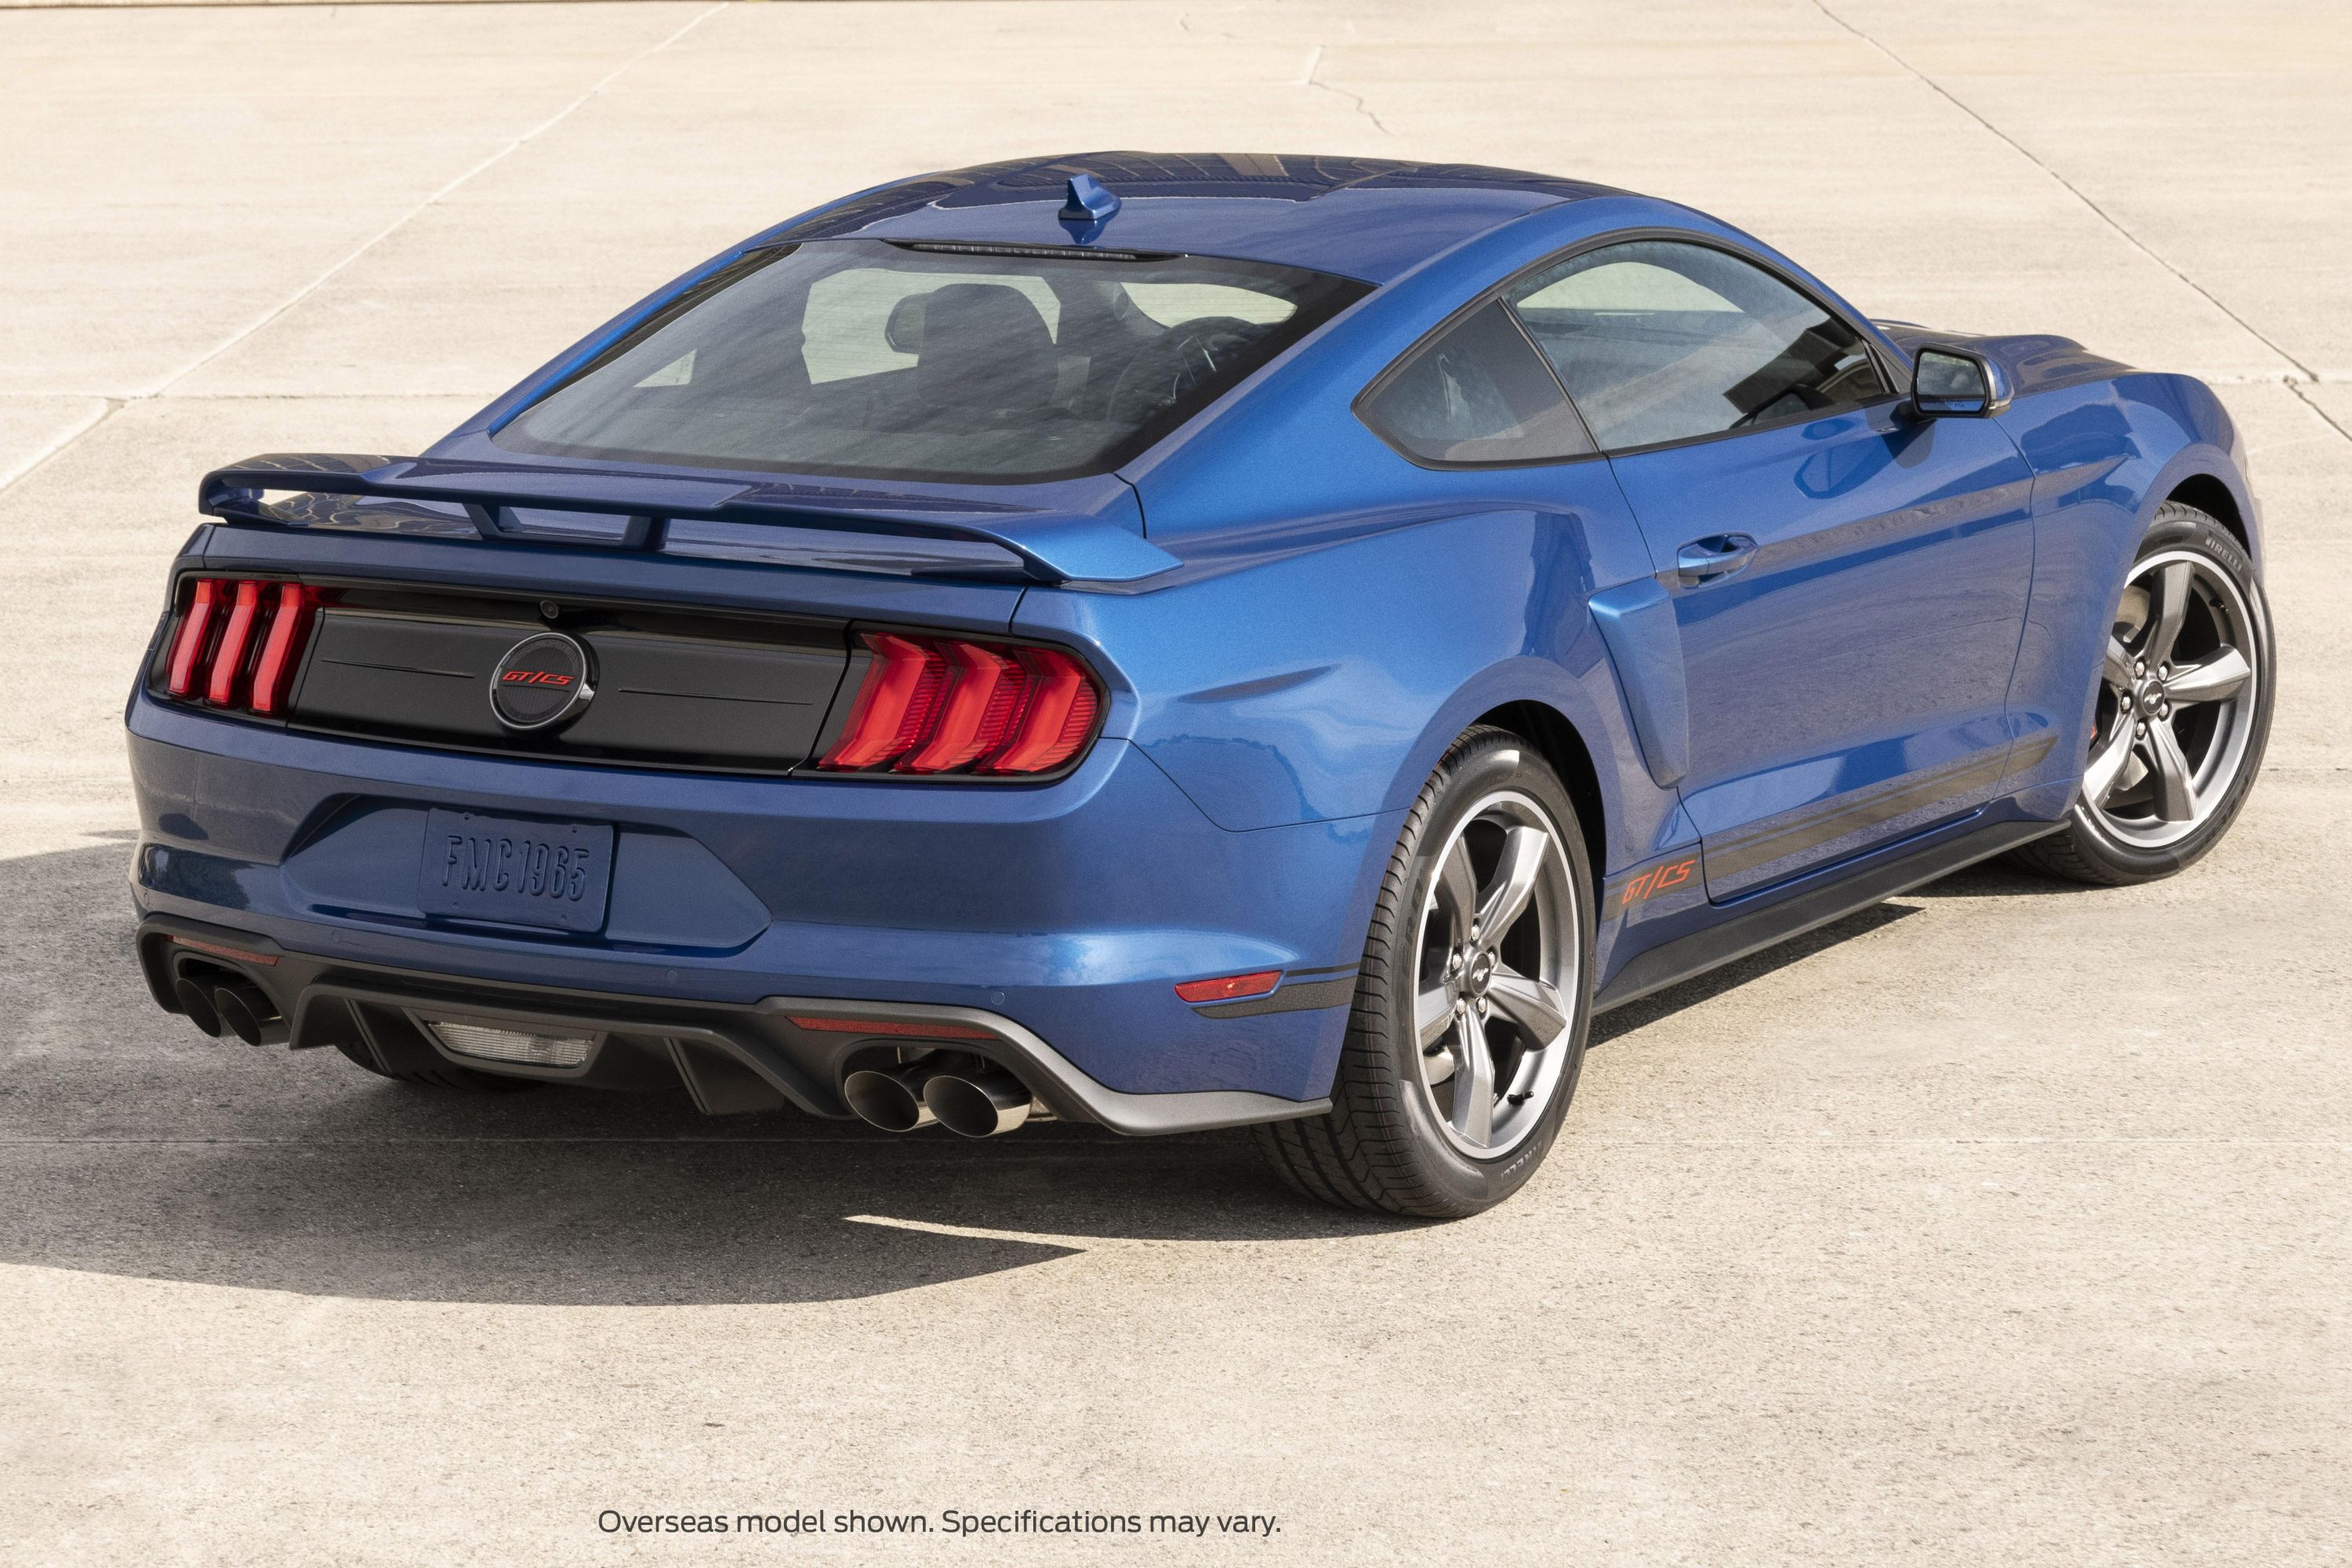 Ford Mustang - Mustang Price, Specs, Images, Colours